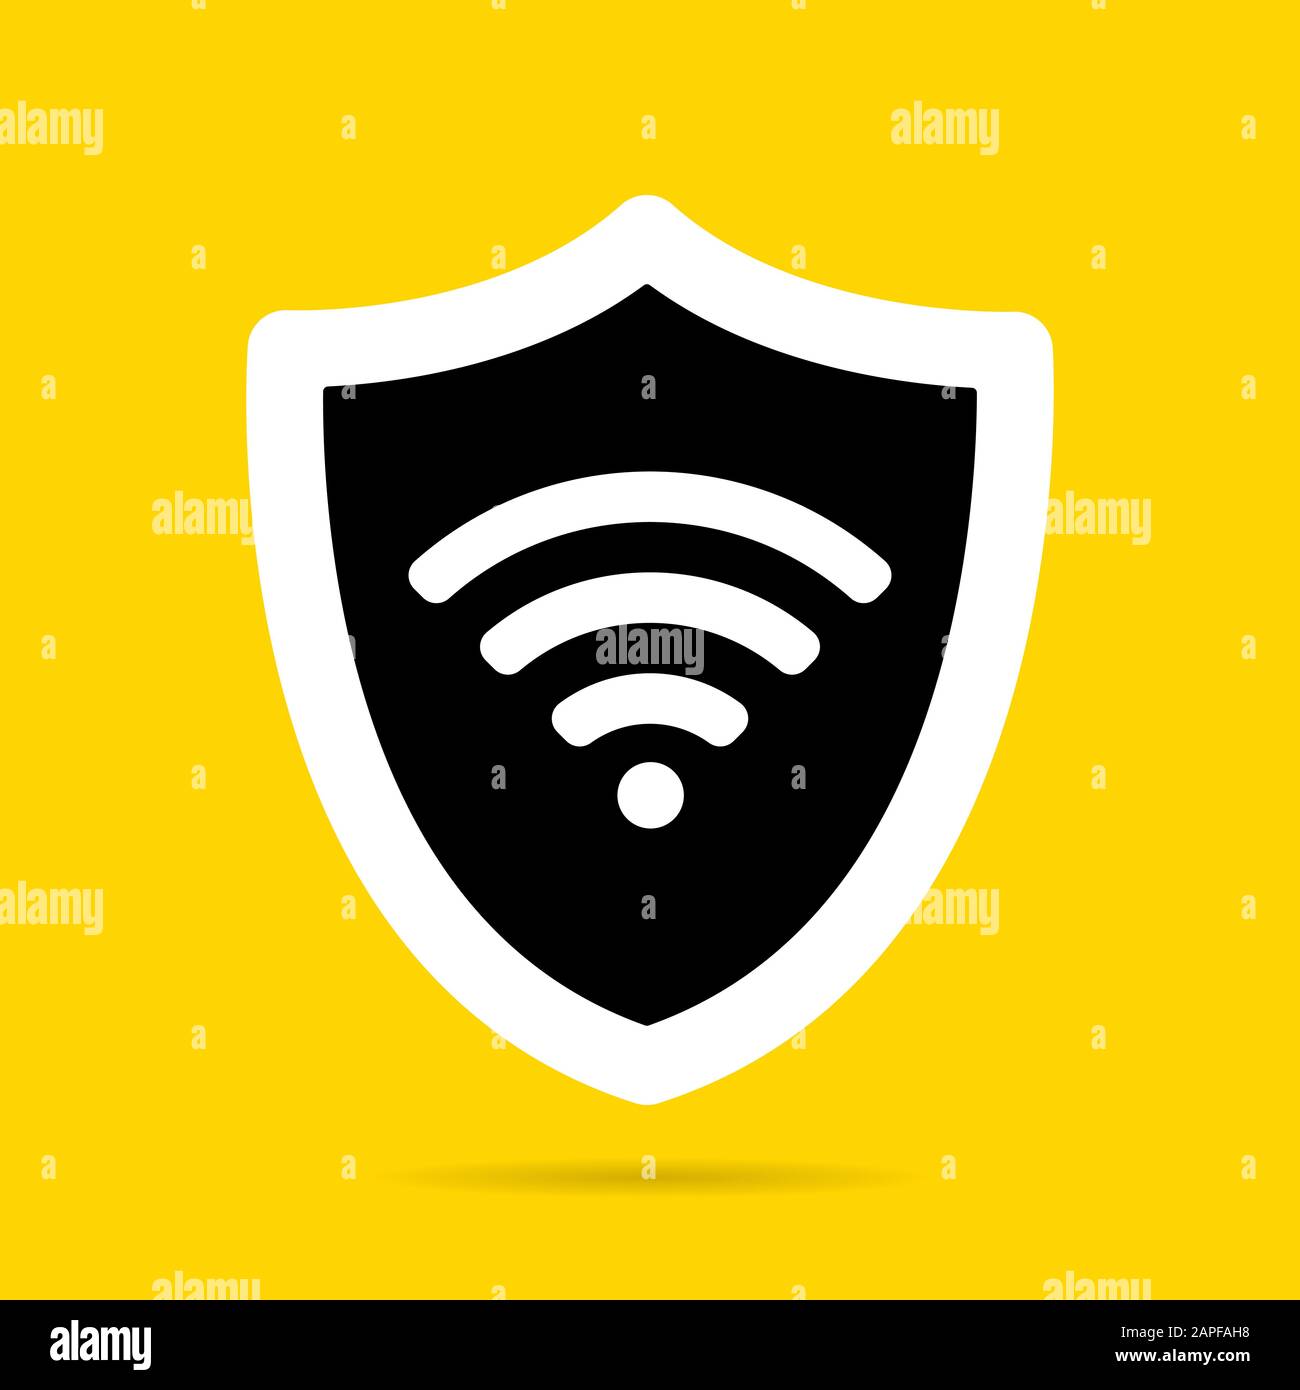 Hotspot shield ogo protected wifi connection icon Vector Image